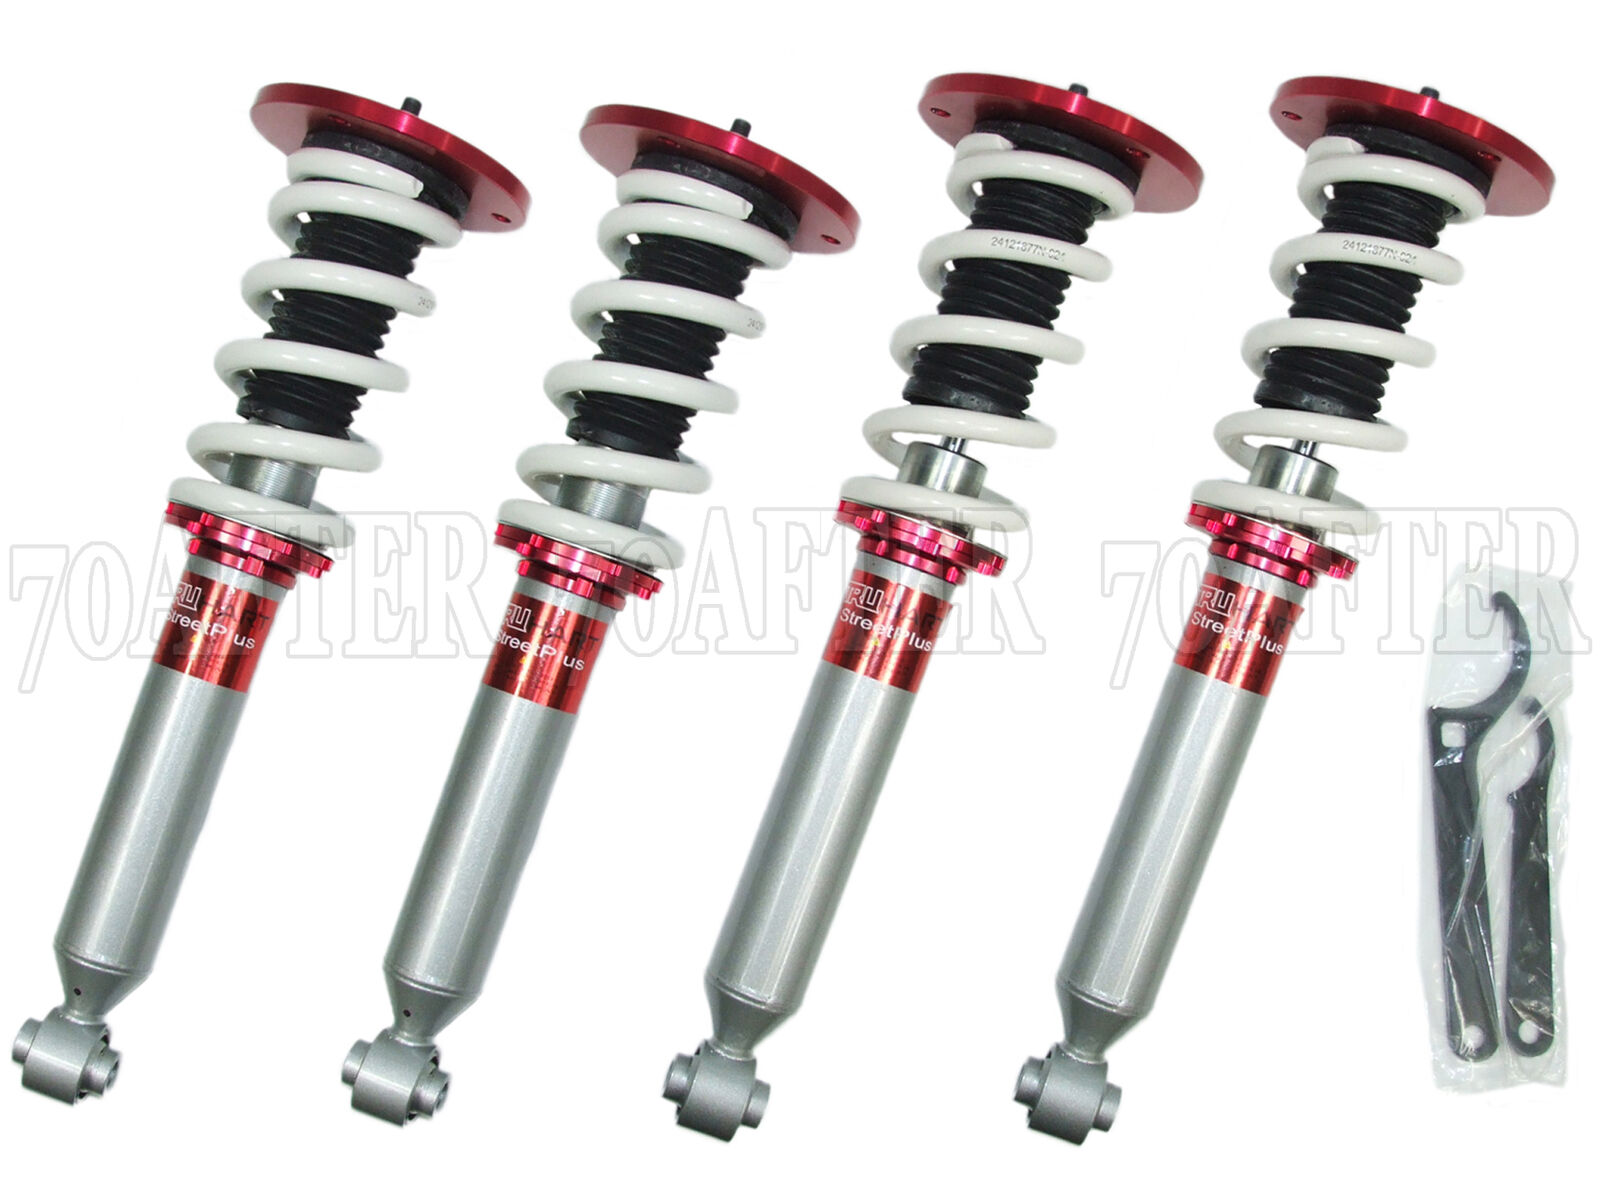 TruHart Streetplus Sport Coilovers for 89-00 Lexus LS400